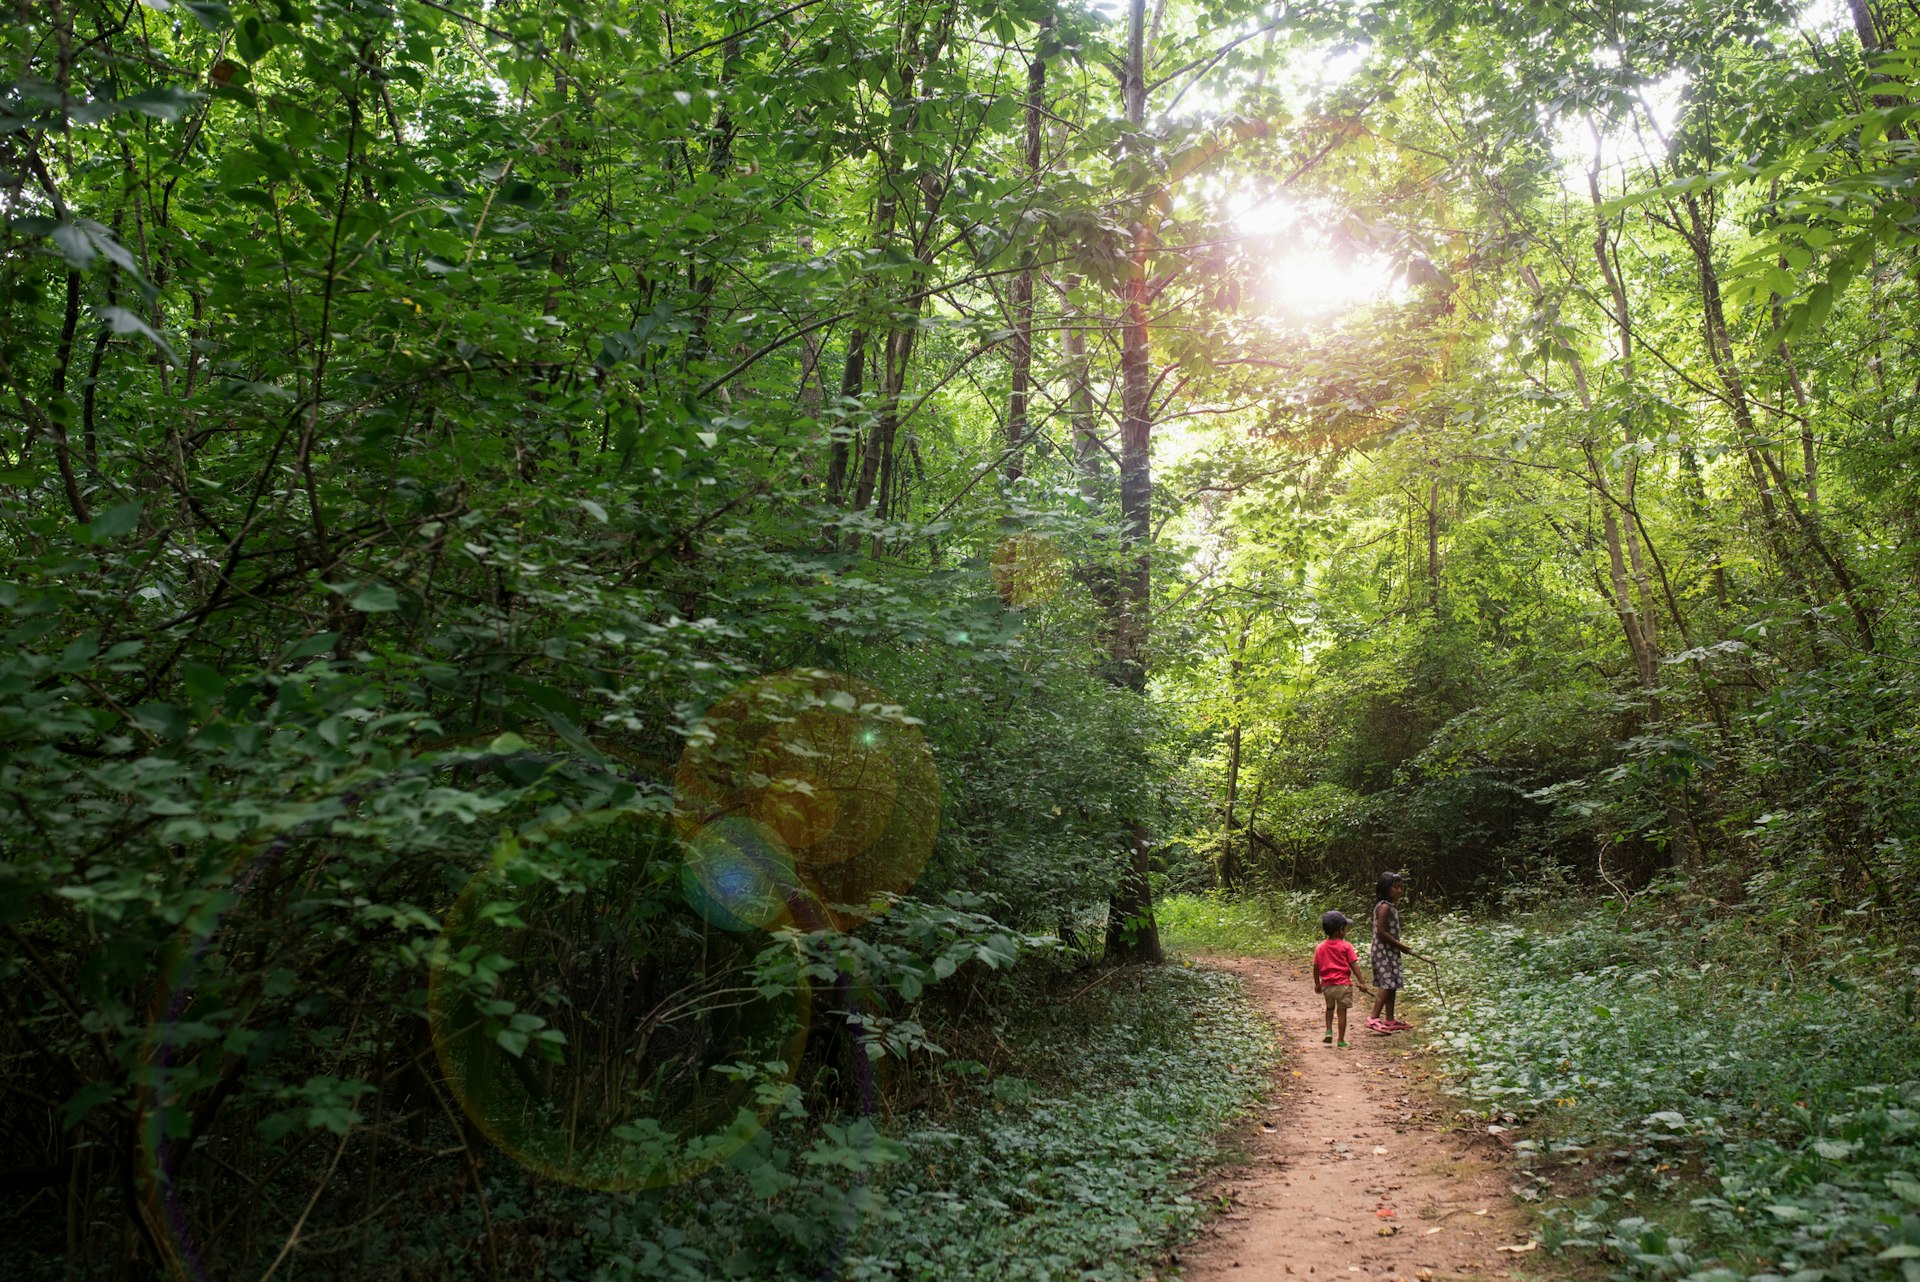 Kids walking on a hiking trail in the forest as the sun shines through the trees